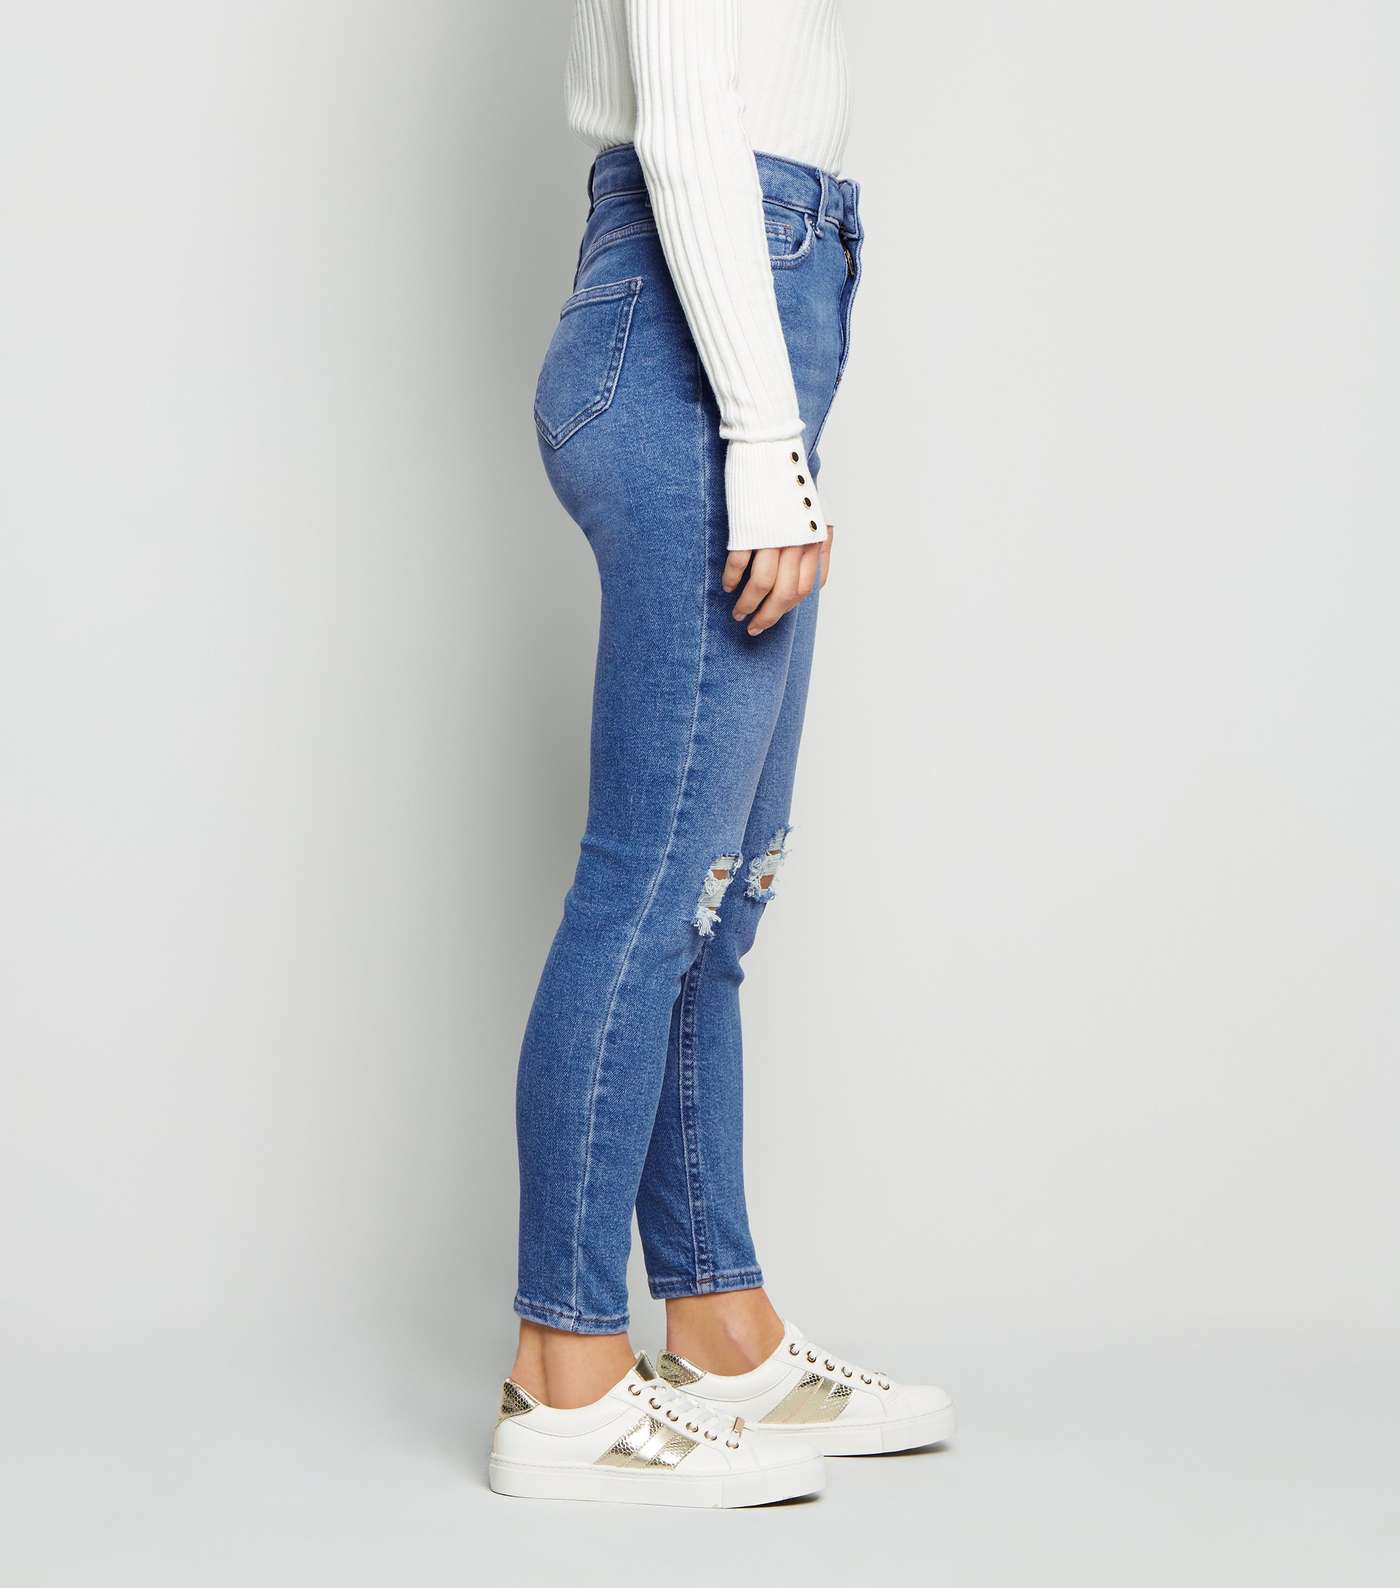 Petite Bright Blue Ripped High Waist Jeans Image 5